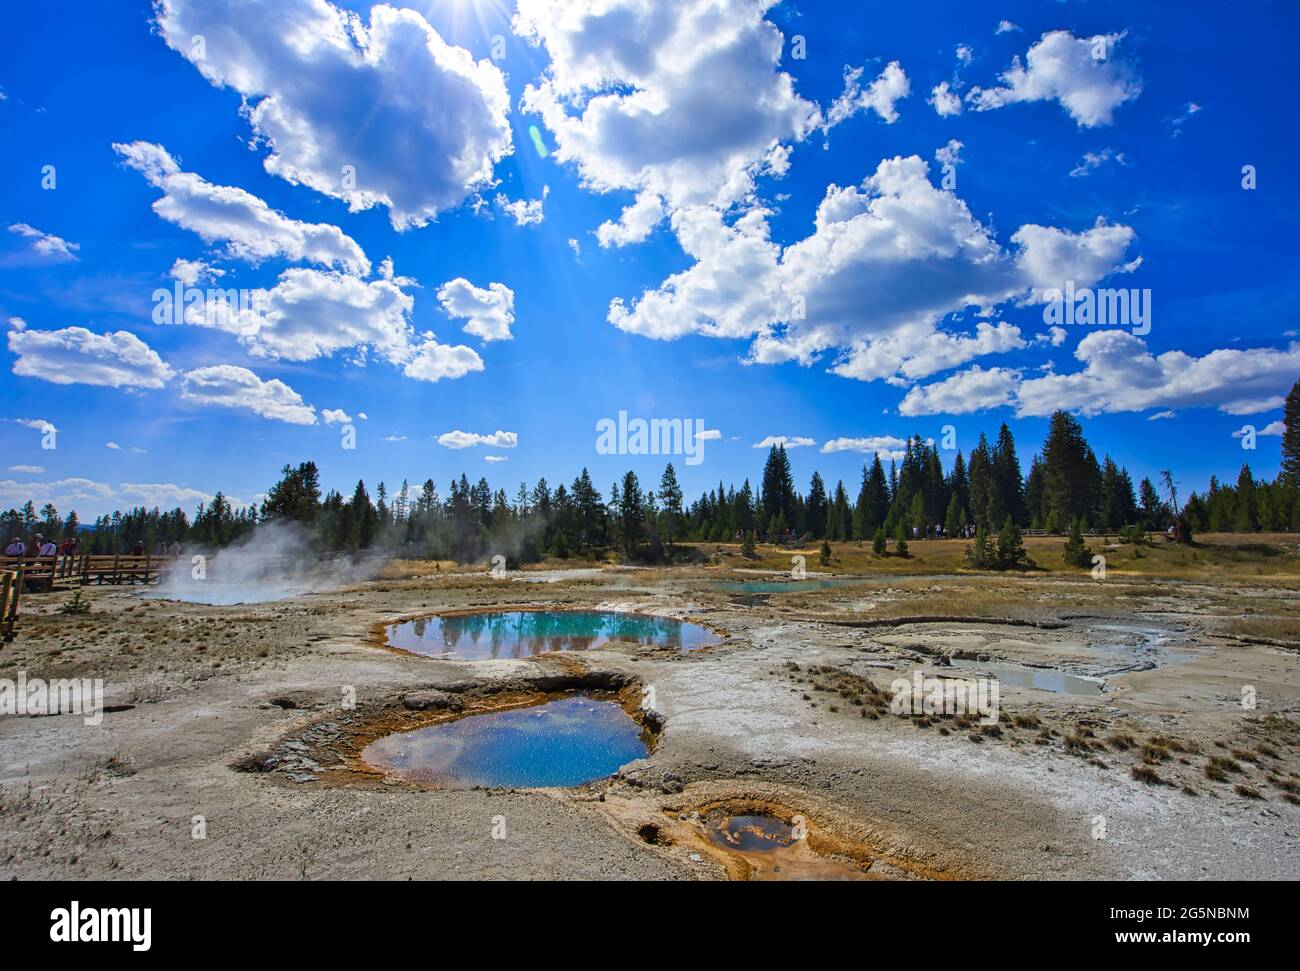 Mysterious and colorful Opal Pool. Yellowstone National Park is famous for its rich wildlife species and geothermal resources. Stock Photo